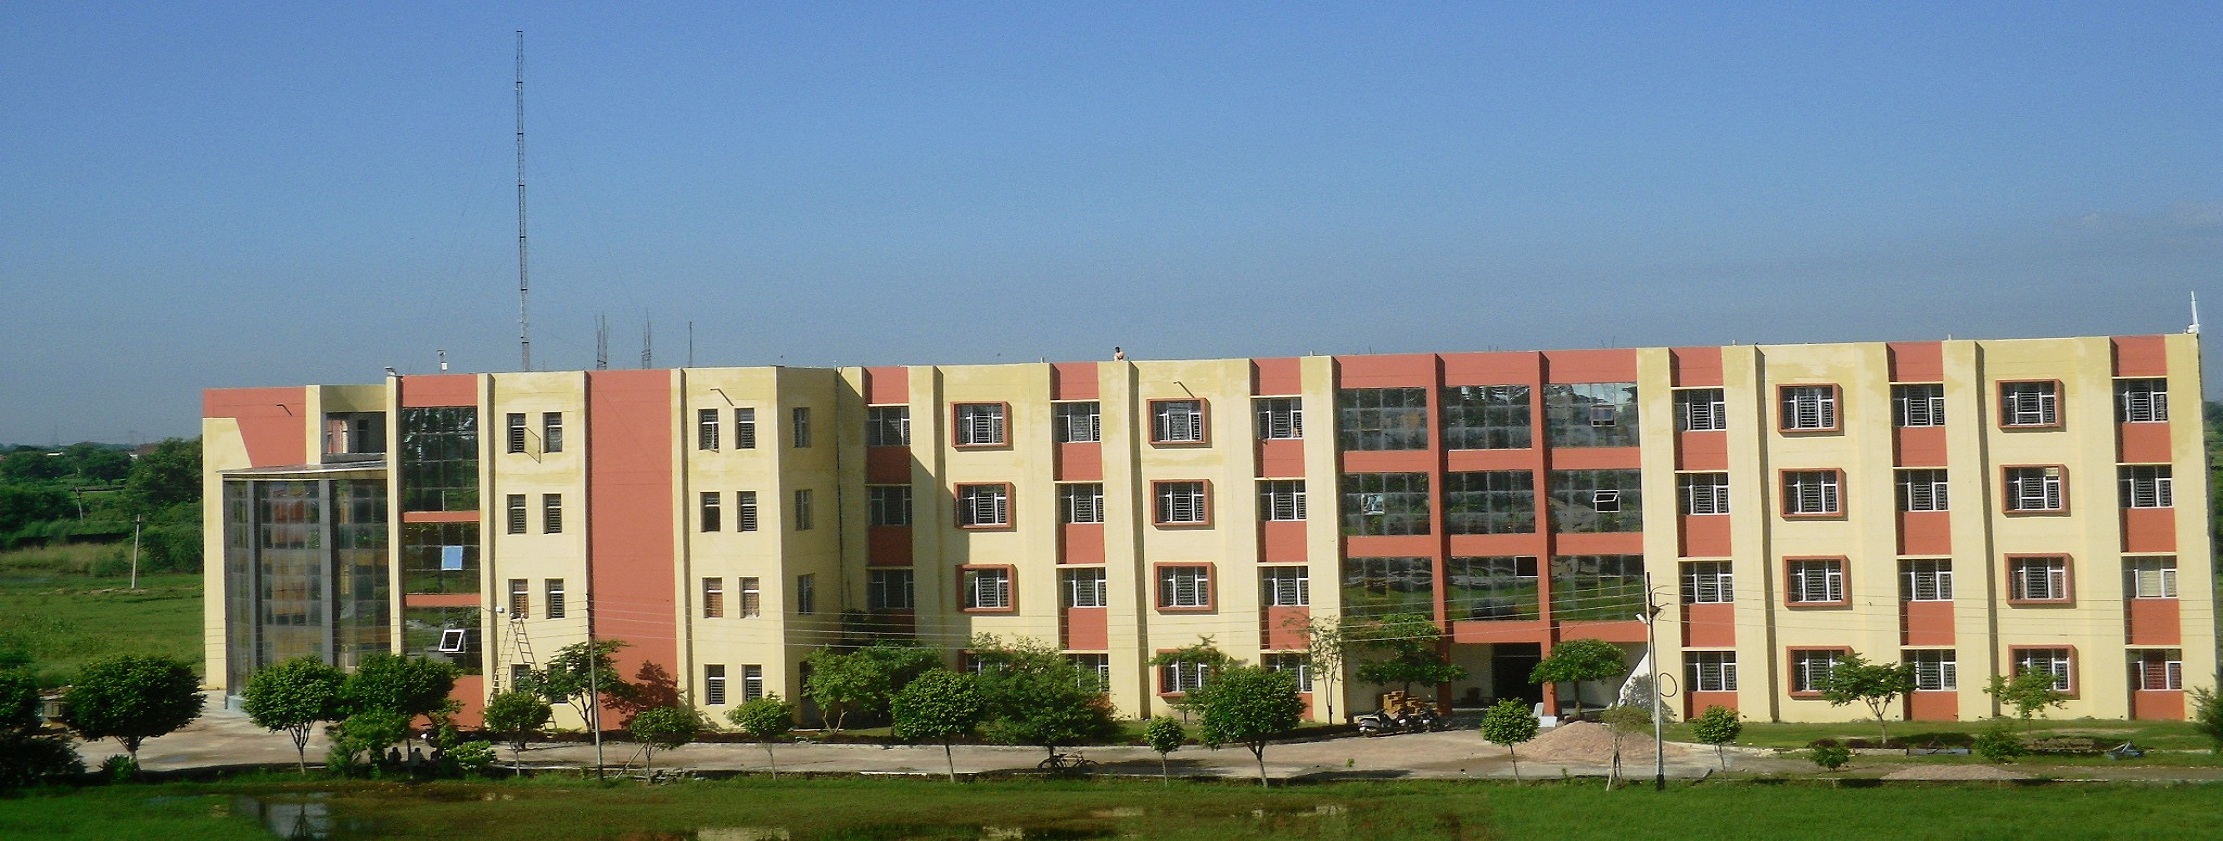 Vision Institute of Technology, Aligarh Image